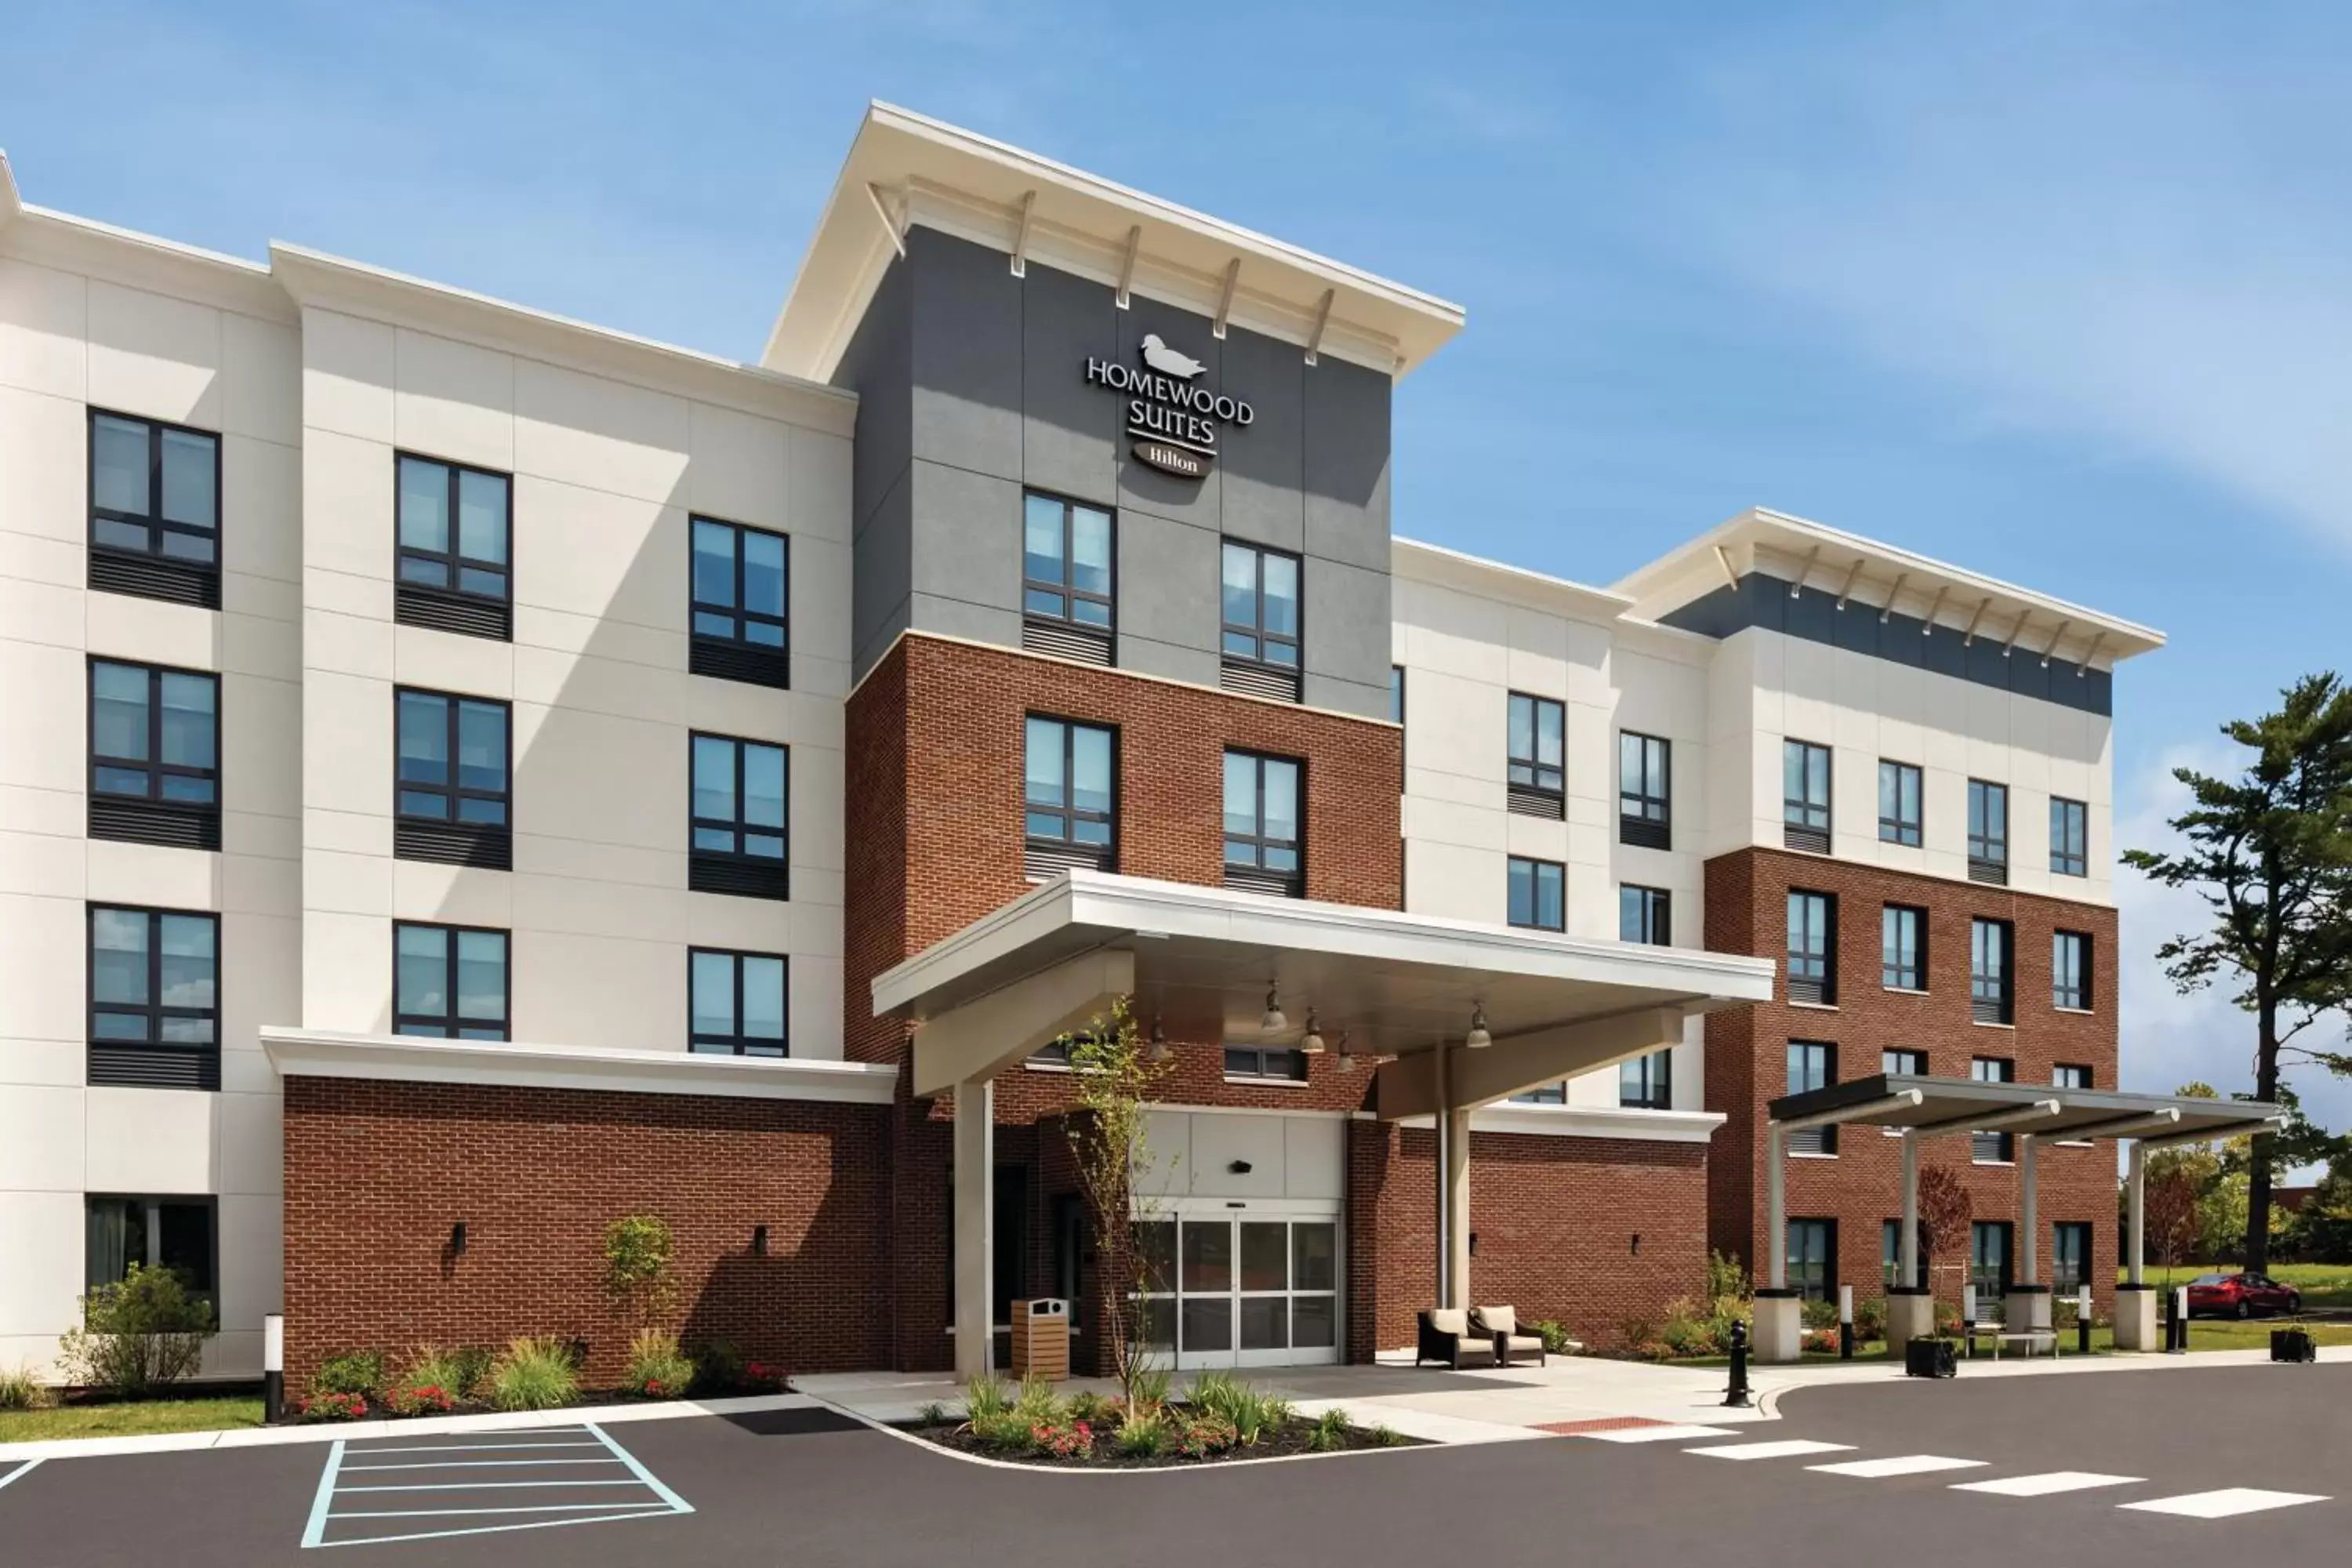 Property Building in Homewood Suites By Hilton Horsham Willow Grove